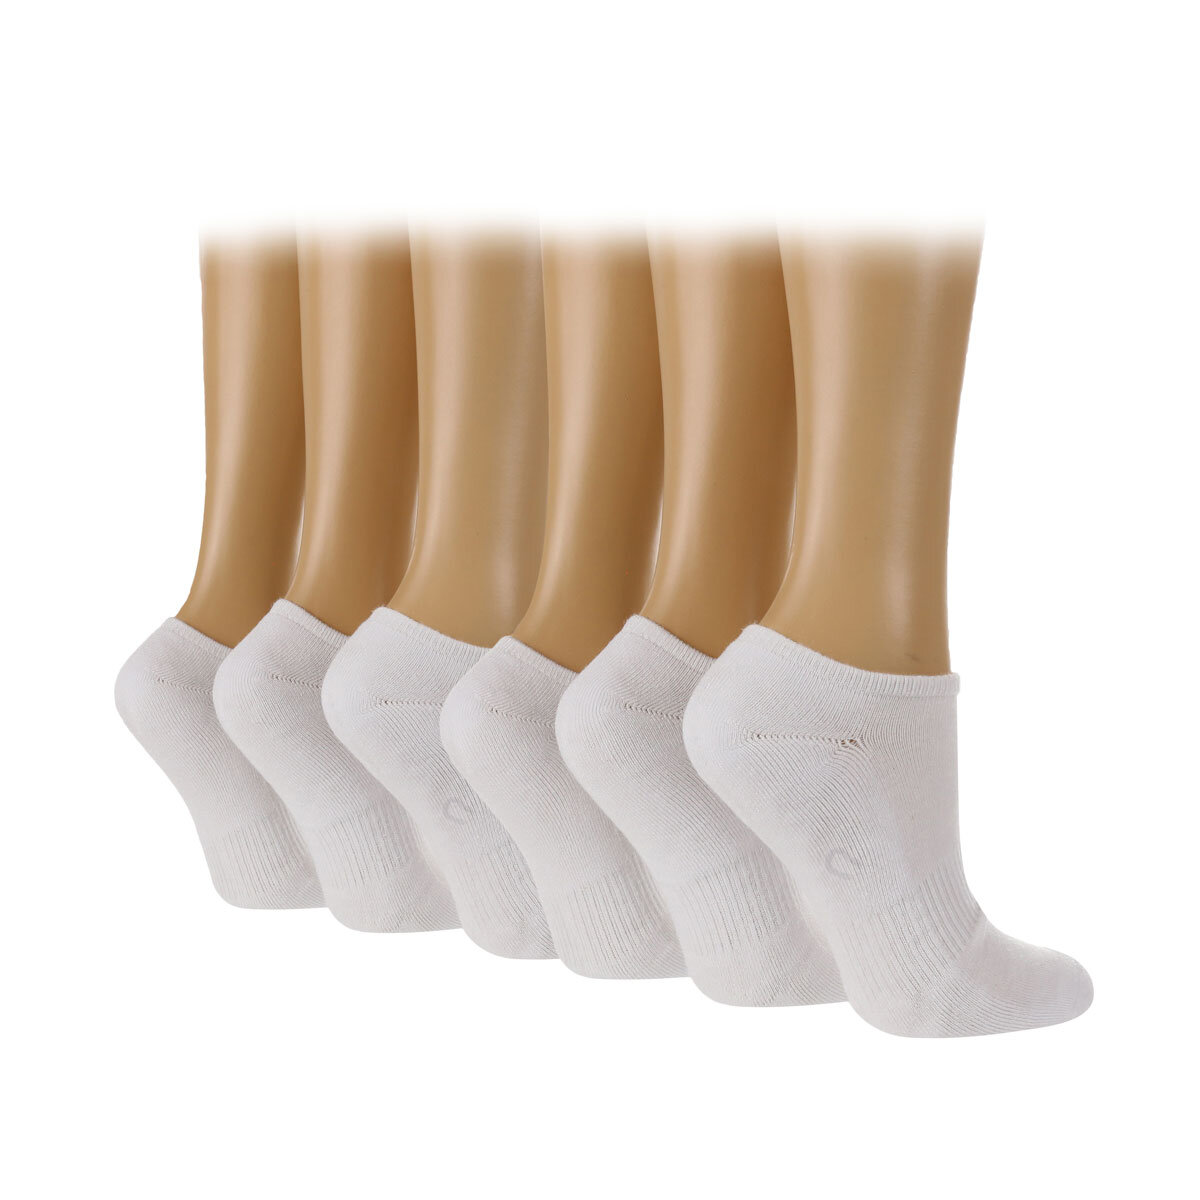 Glenmuir Women's 2 x 3 Pack Bamboo Cushioned Trainer Socks in White, Size 4-8